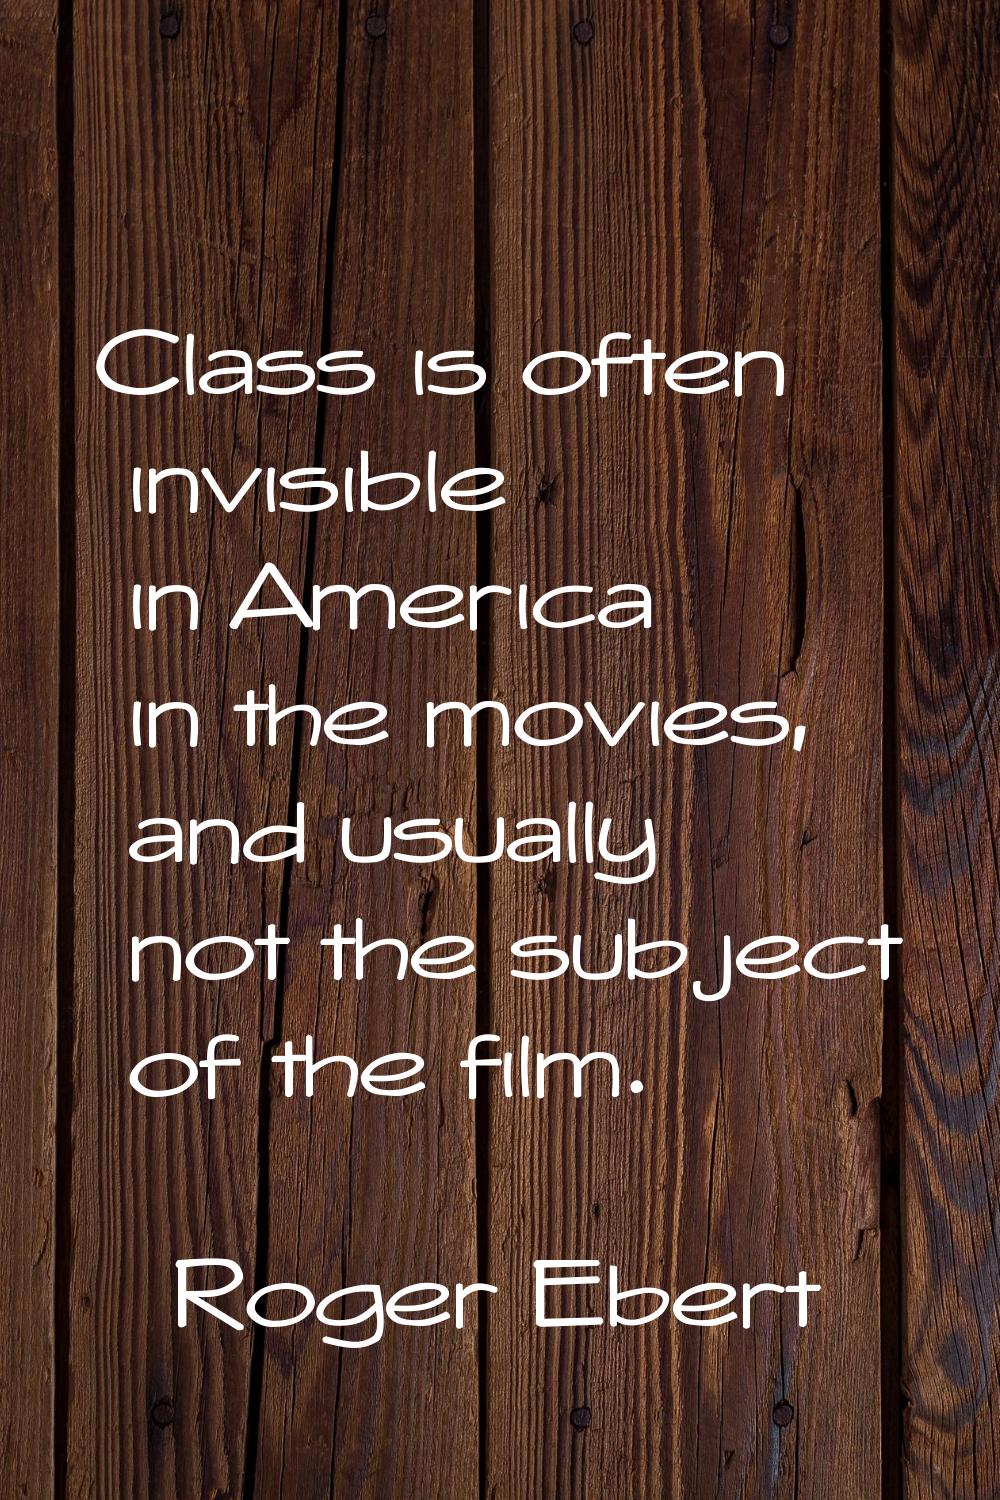 Class is often invisible in America in the movies, and usually not the subject of the film.